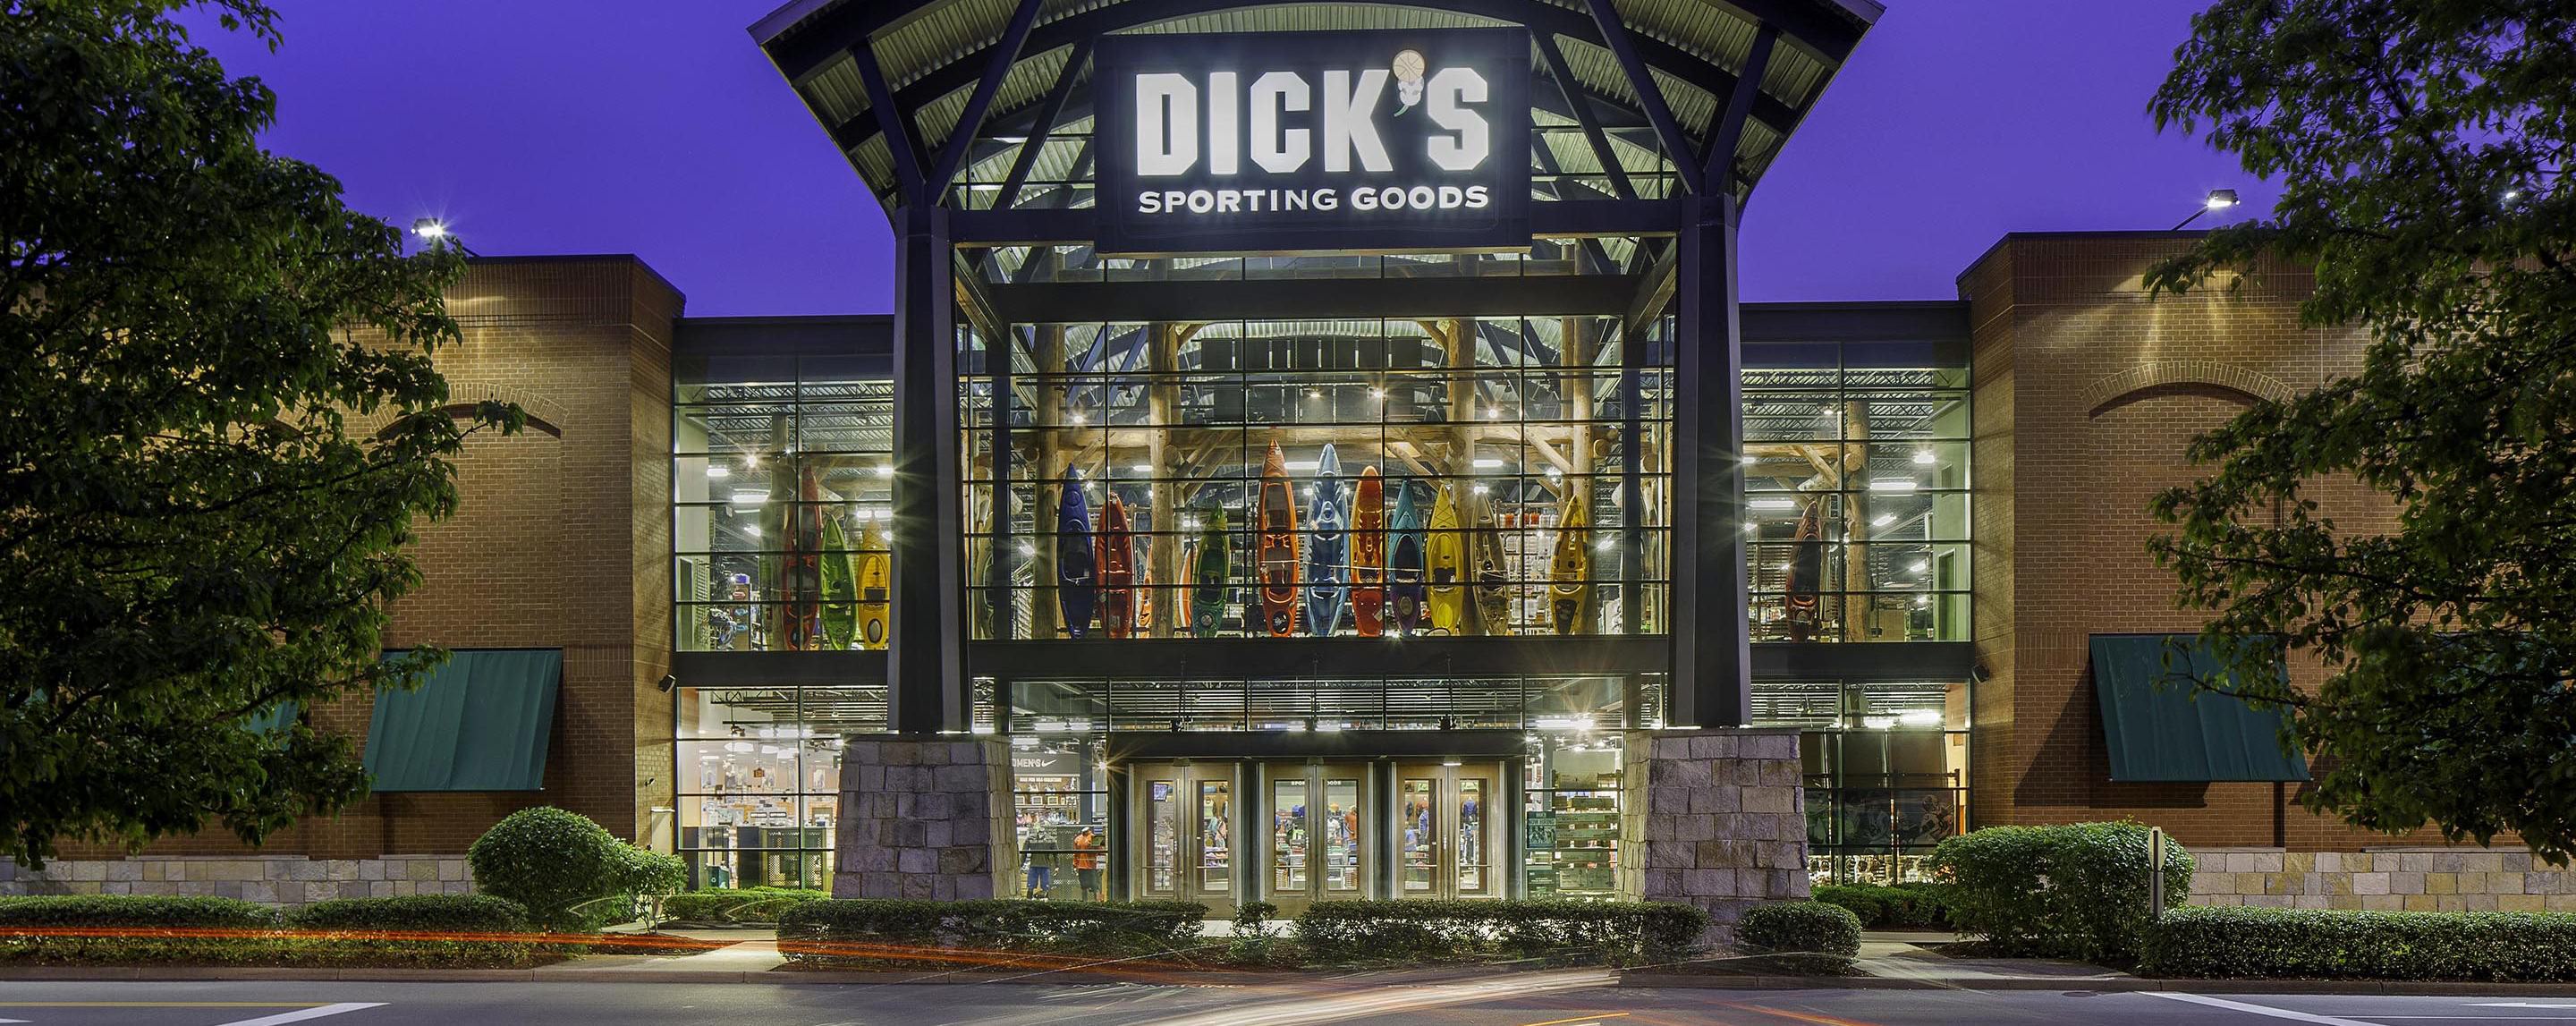 An outside shot of the storefront for Dick's Sporting Goods. The storefront is well lit and several stories tall.